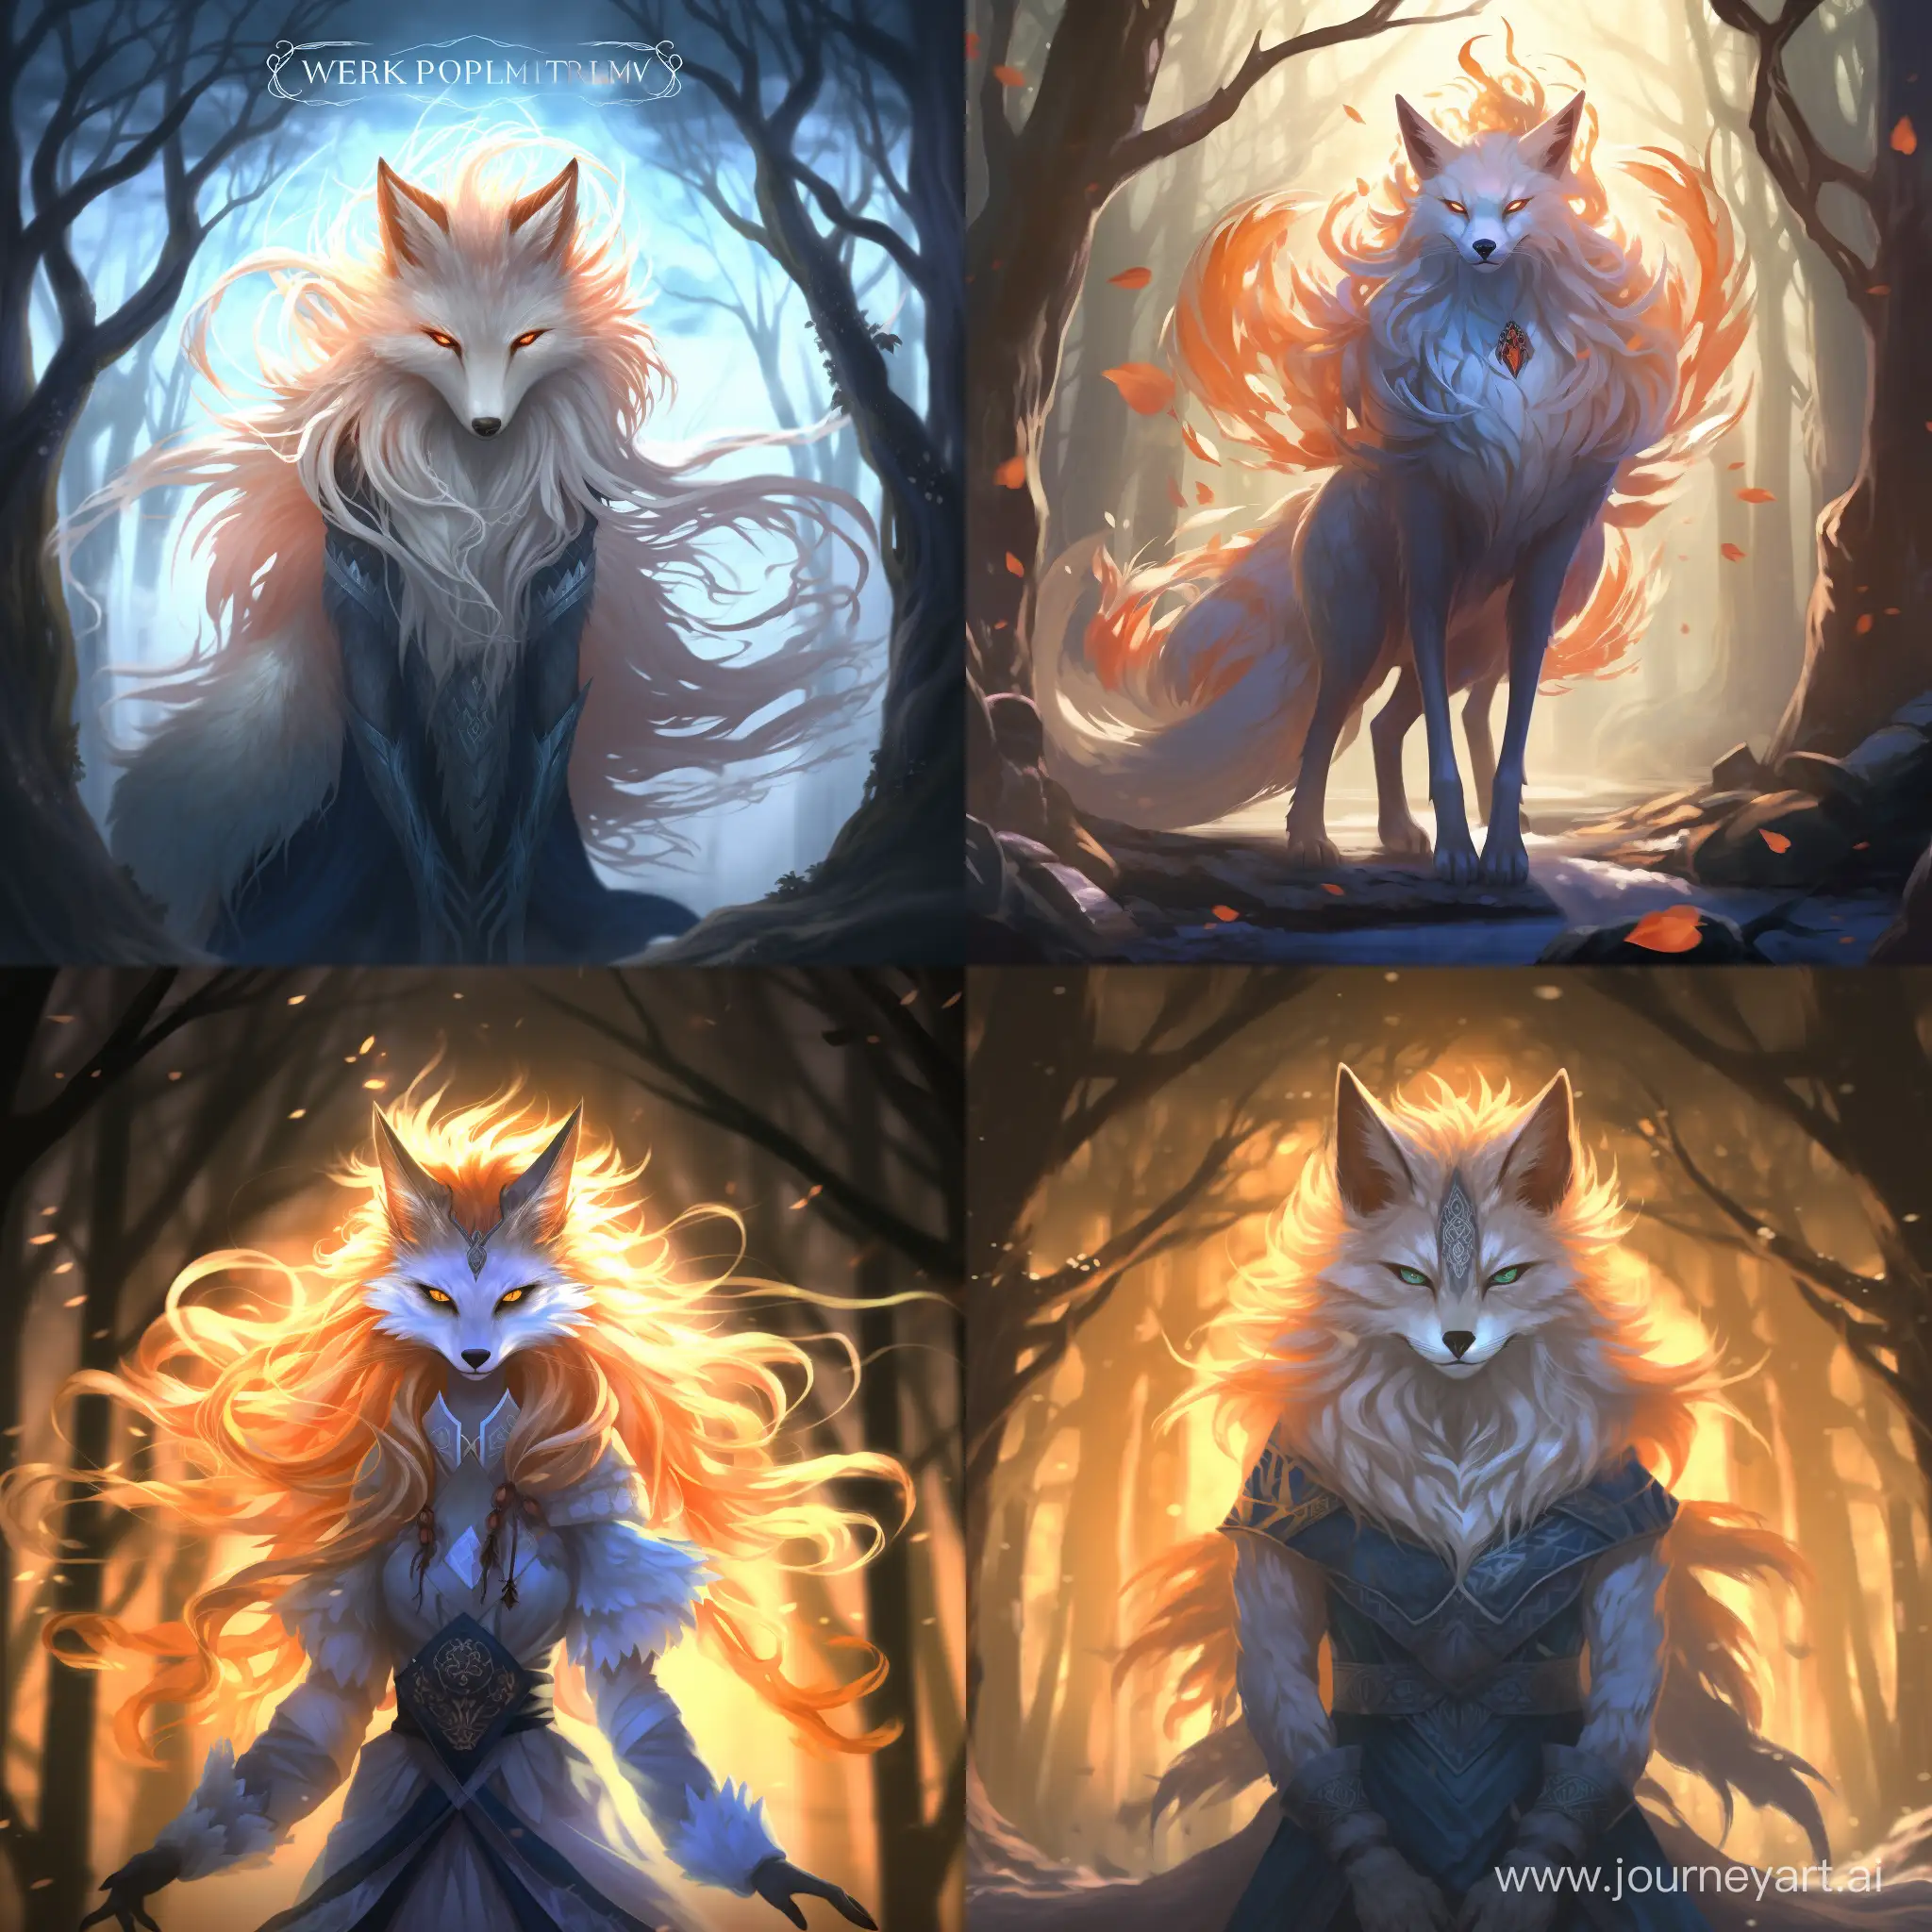 n a secluded clearing in the forest, a nine-tailed fox sorceress stands before a fire. Her long, white fur is tinged with blue, and her eyes glow with a bright, otherworldly light. She is chanting in a language that is both ancient and primal, and as she does, the fire grows brighter and brighter.  Suddenly, the sorceress raises her hands, and a ball of light appears between them. The ball is white and blue, and it glows with a soft, ethereal light. The sorceress smiles, and she gently releases the ball of light into the air.  The ball of light floats away, and it soon disappears into the darkness of the forest. The sorceress watches it go, and then she turns and walks away.  The scene is peaceful and serene. The fire crackles and pops, and the only sound is the sorceress's soft footsteps. The light from the ball of light casts a gentle glow over the clearing, and it seems to fill the air with a sense of magic.  The sorceress is a powerful being, and she is using her magic for good. She is creating a ball of light that will bring hope and healing to the world. The light is a symbol of her power and her compassion, and it is a reminder that there is always hope, even in the darkest of times.